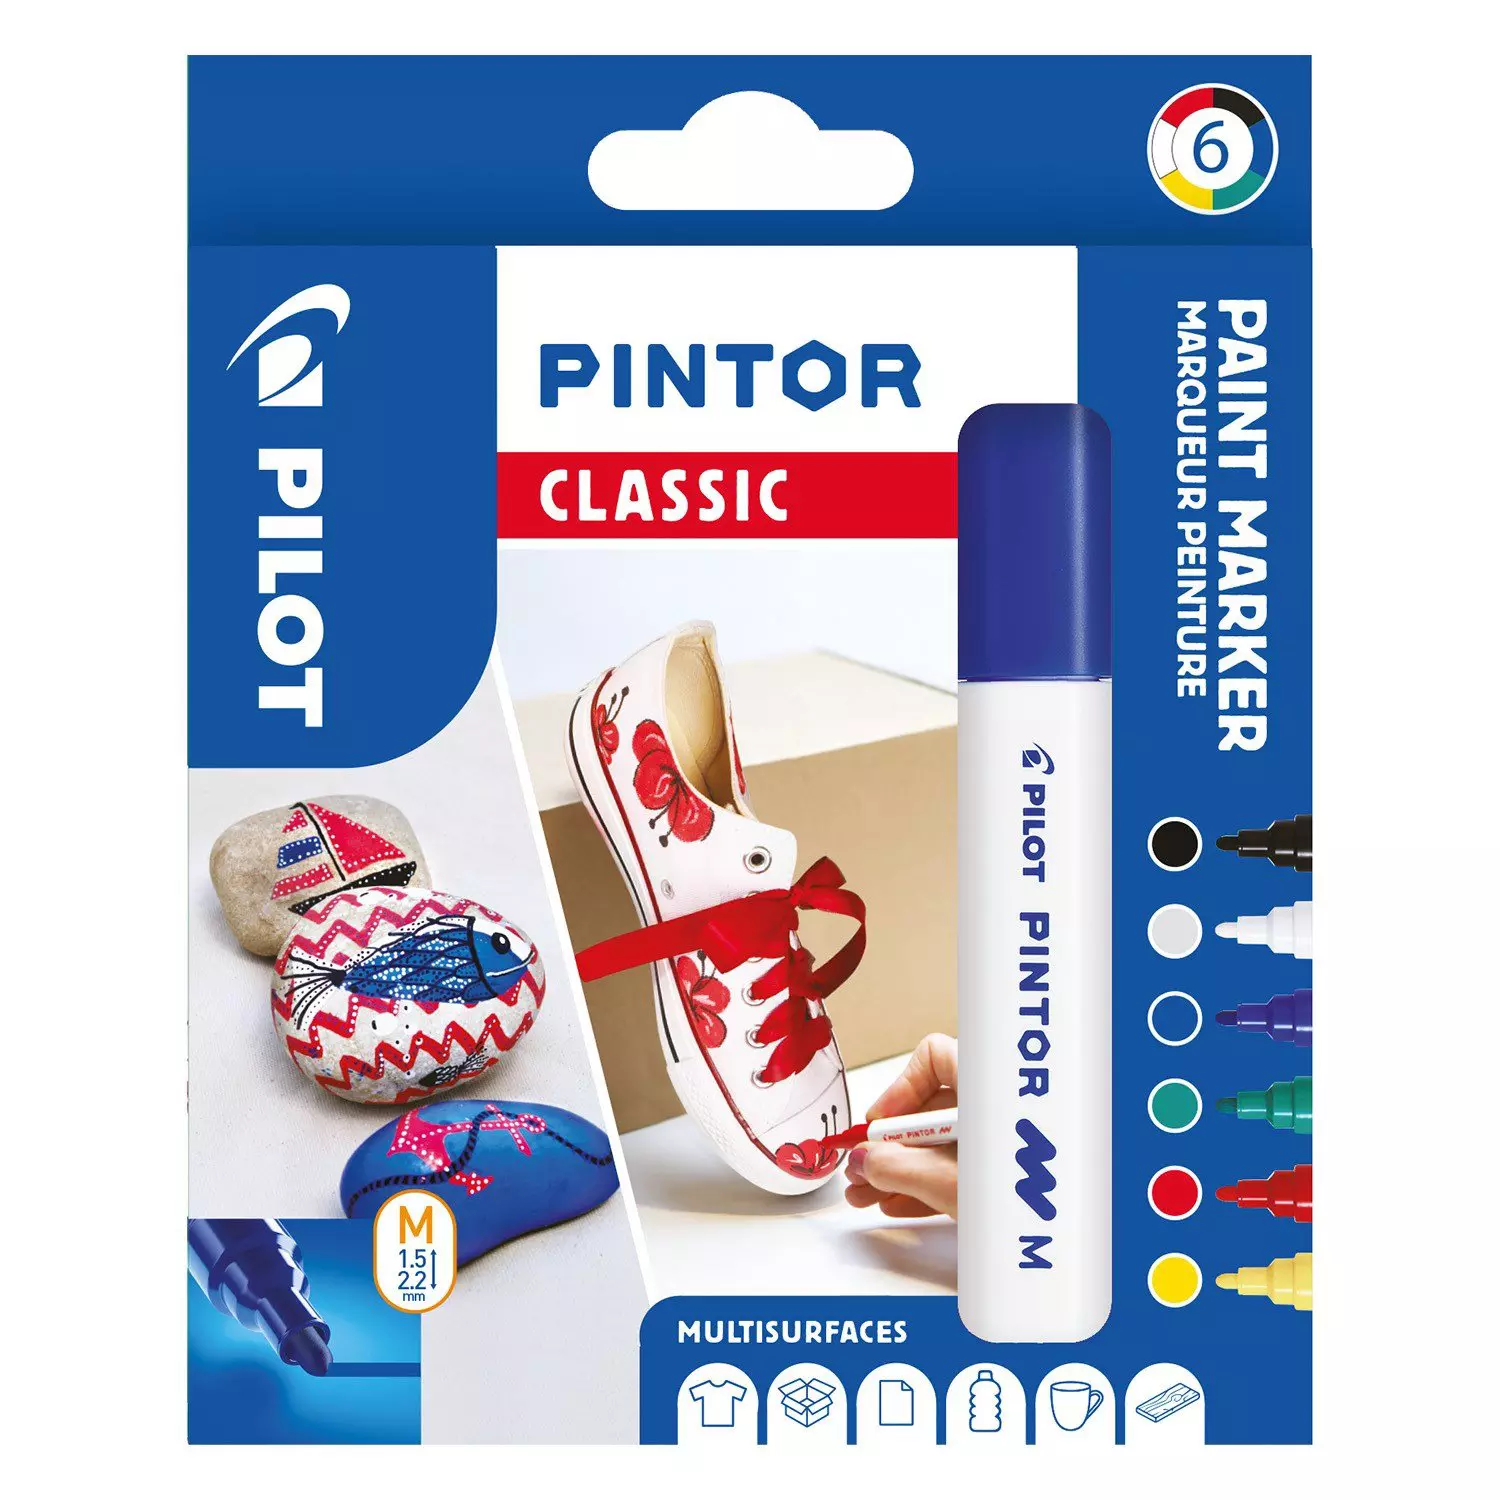 Pilot Pintor Marker Box With Classic